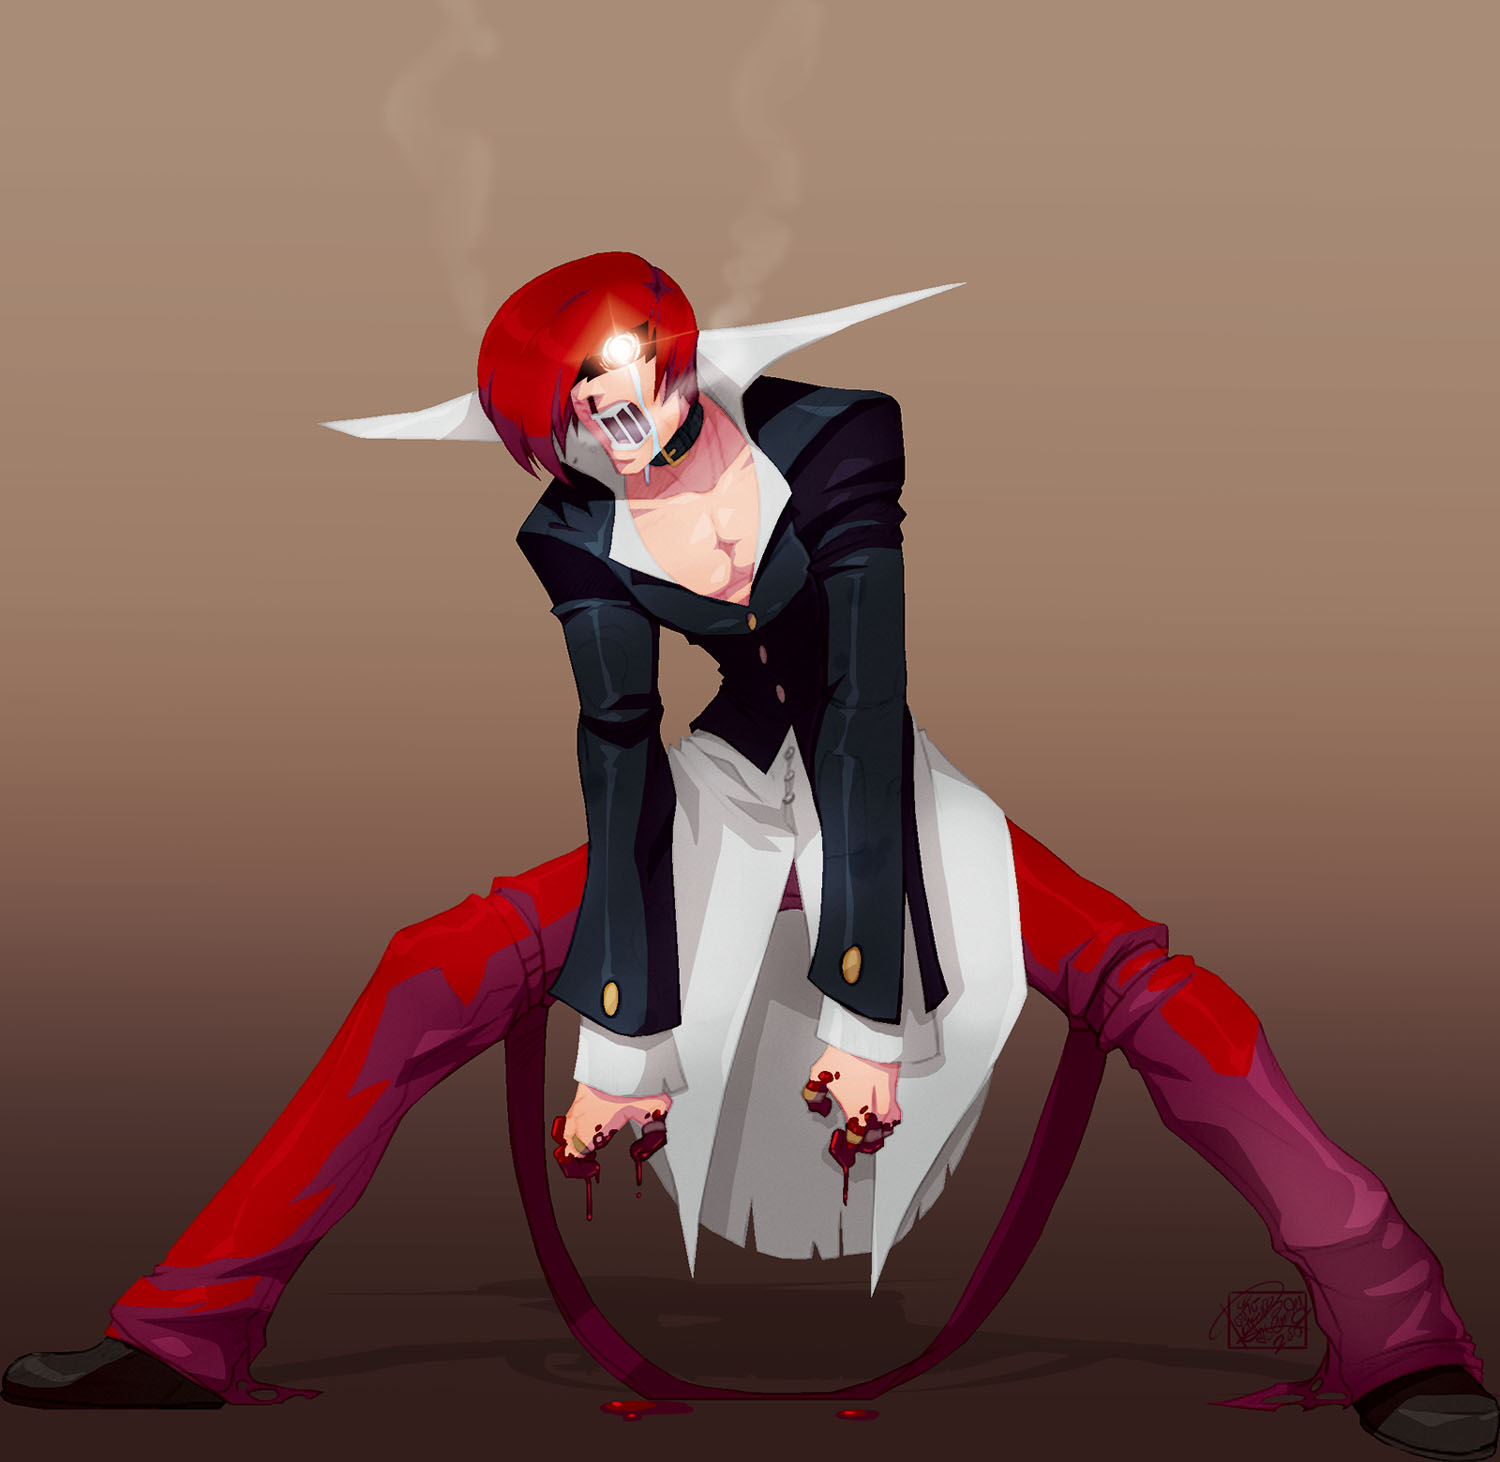 Orochi Iori from The King of Fighters - Game Art Gallery